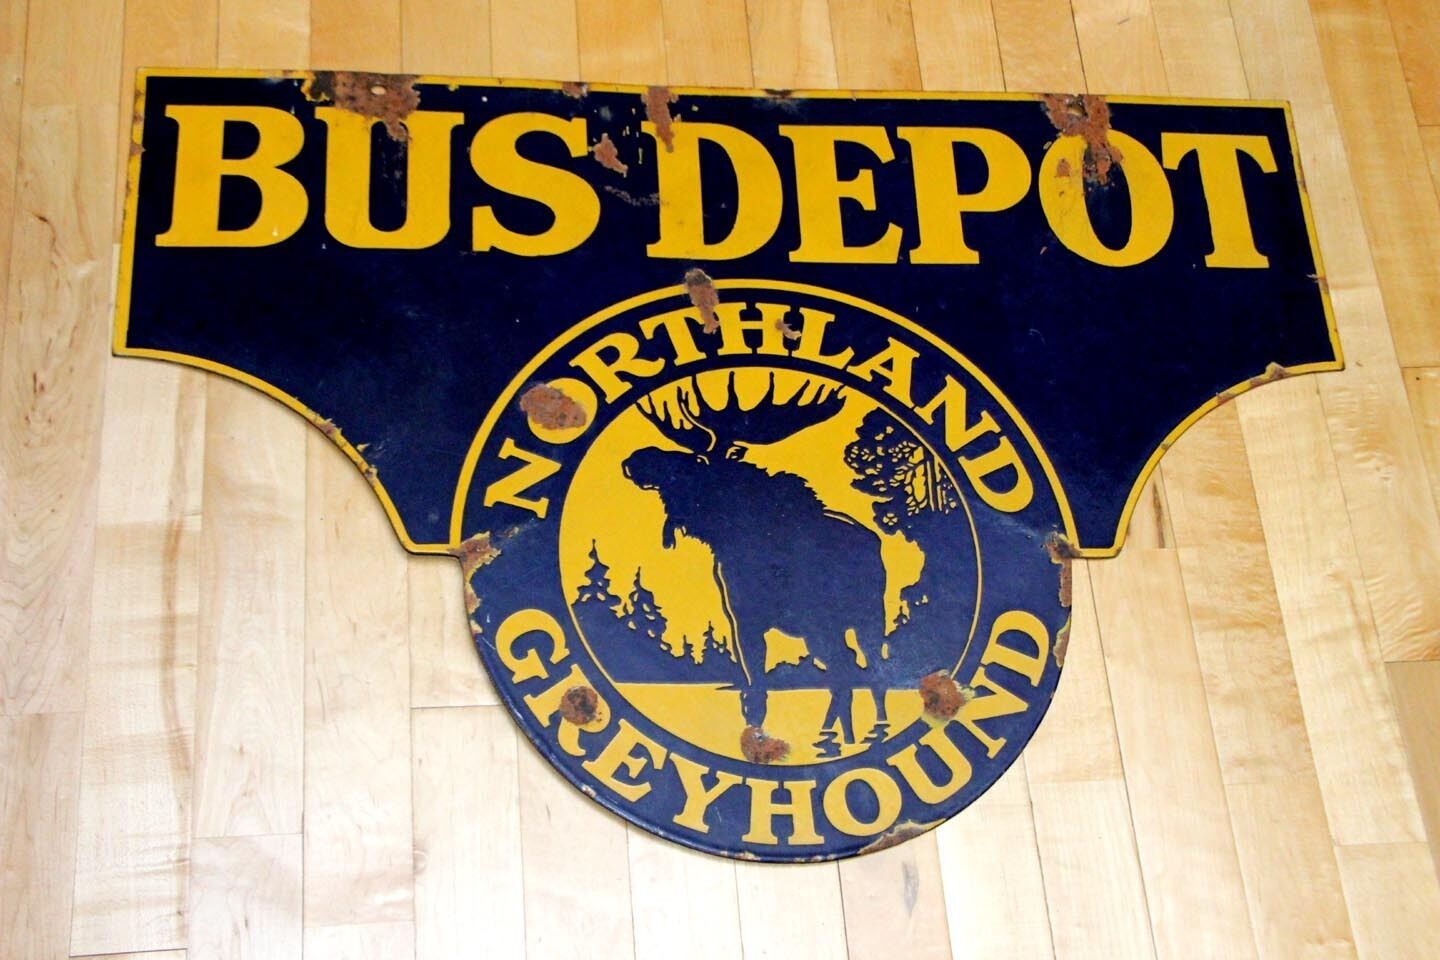 1920's Northland Greyhound Bus porcelain sign, see my other neon sign listings